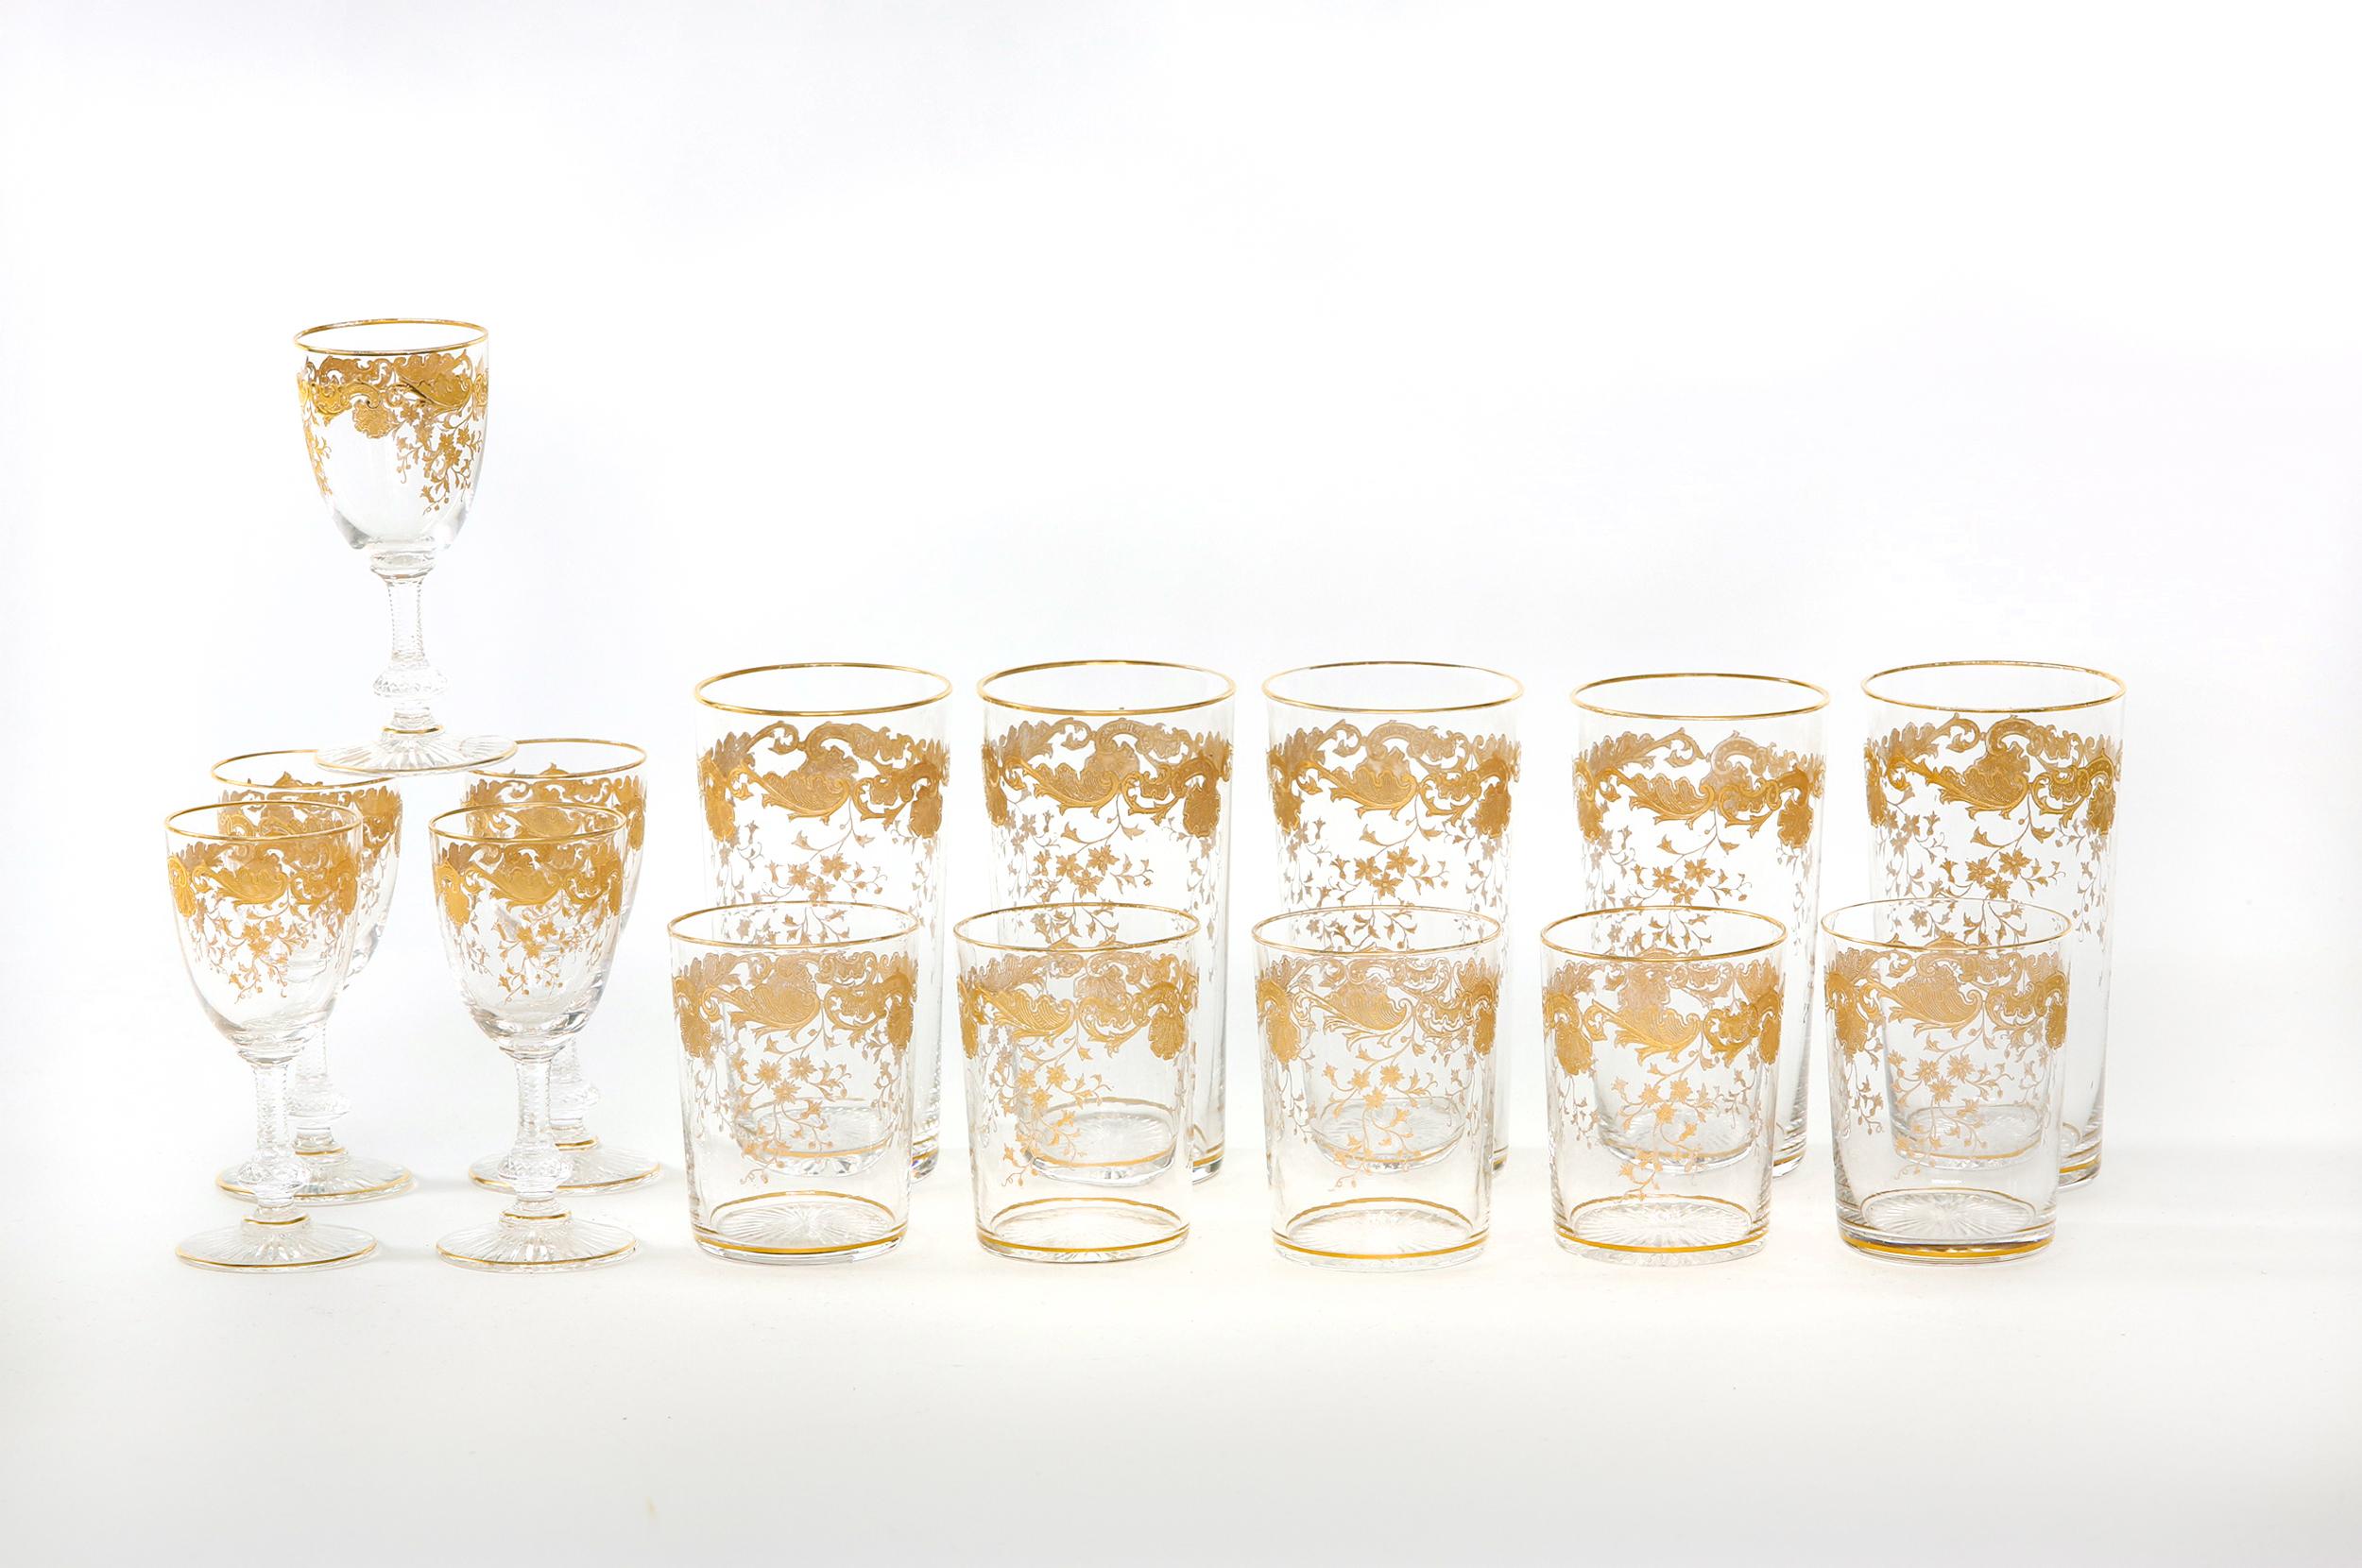 Mid-20th century Saint Louis crystal with gold design details barware / tableware set of 15 pieces. Each piece is in great condition. Maker's mark undersigned. Five high ball glasses 5.5 inches tall x 3 inches diameter five low ball glasses 3.5